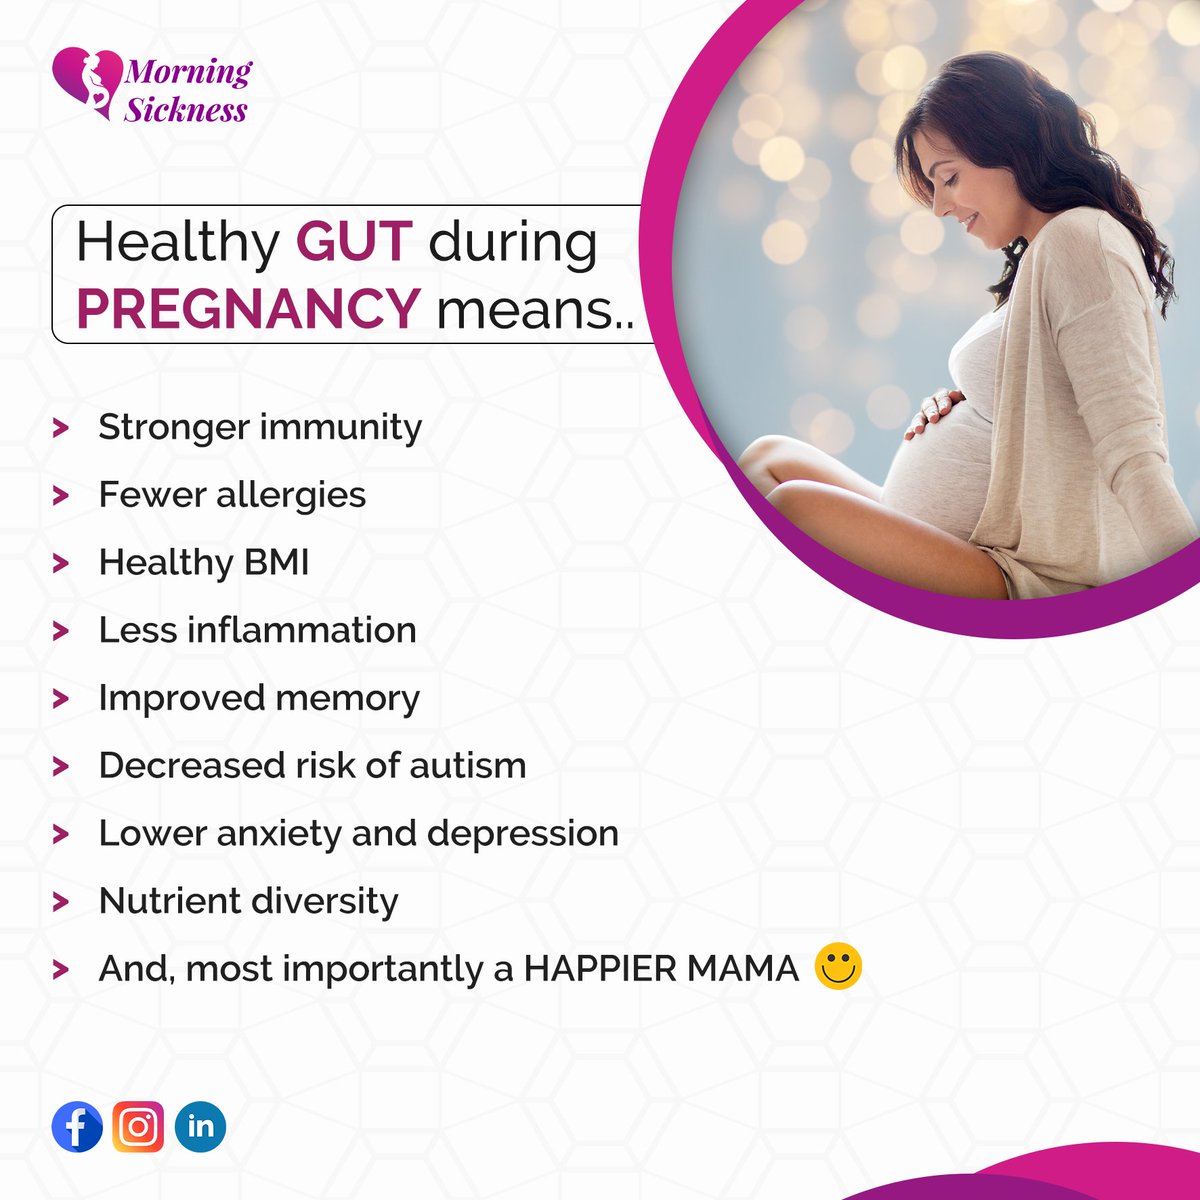 Dear pregnant mama, 

Remember that a peak-functioning digestive system during pregnancy not only keeps your body feeling good and light-weight but also set up good health for your baby. 

#morningsickness #morningsicknessrelief #guthealth #guthealthduringpregnancy